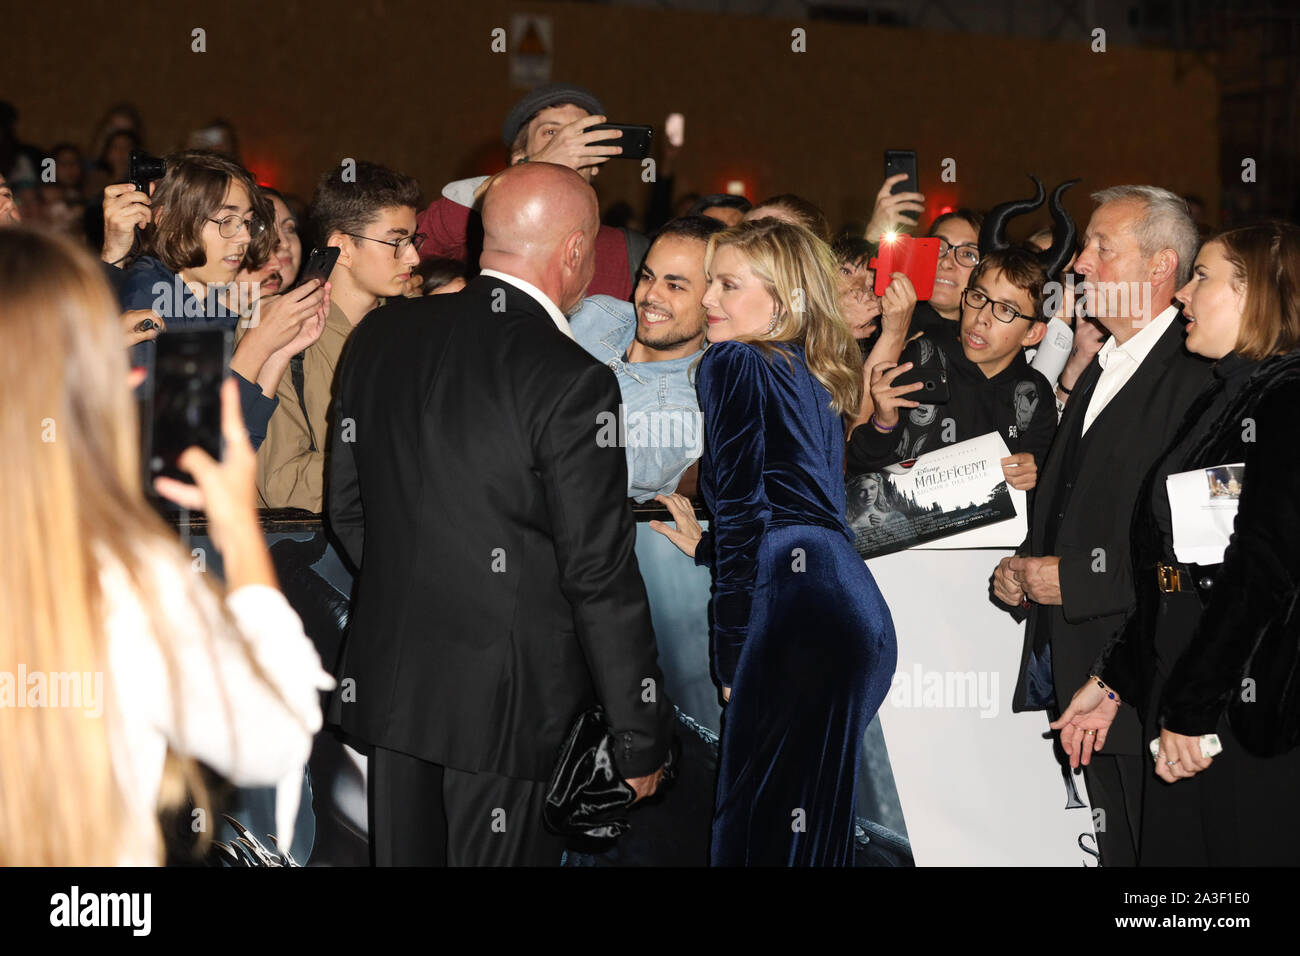 Rome, Presentation of the Maleficent Film - Angelina Jolie and Michelle Pfeiffer meet the fans In the Photo: Michelle Pfeiffer Stock Photo